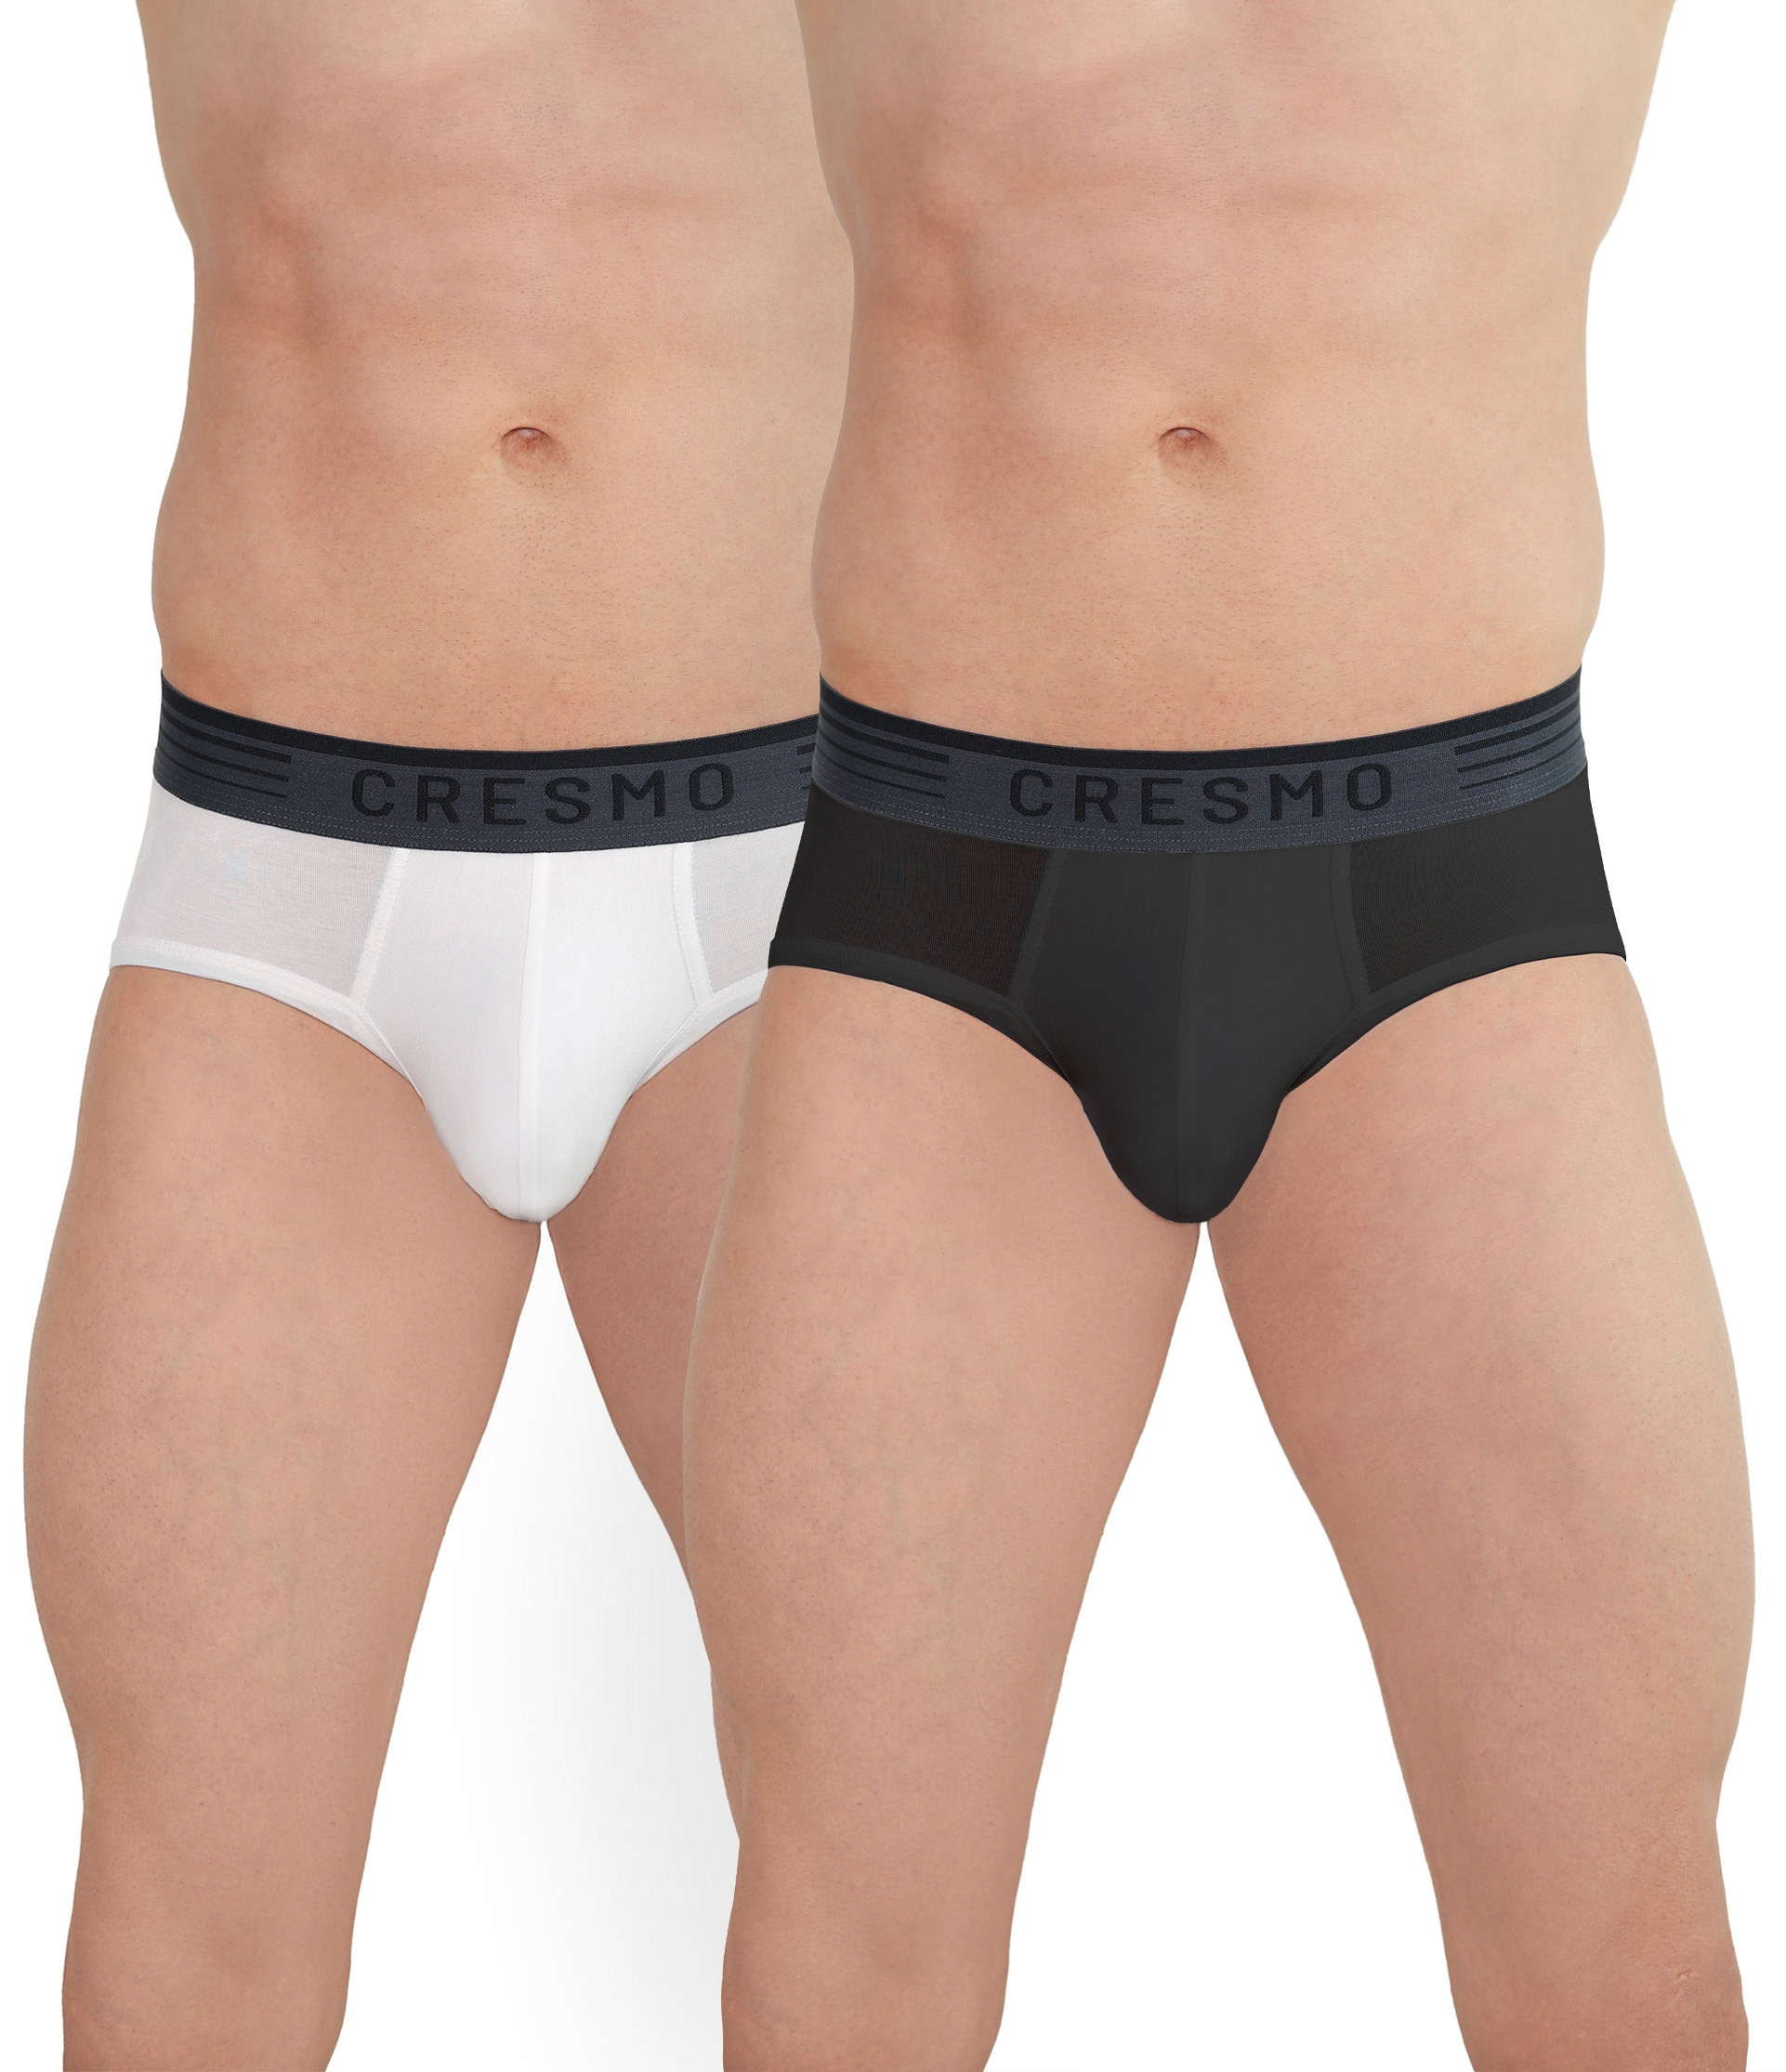 CRESMO | CRESMO Men's Microbial Micro Modal Underwear Breathable Ultra Soft Comfort Lightweight Brief (Pack of 2)